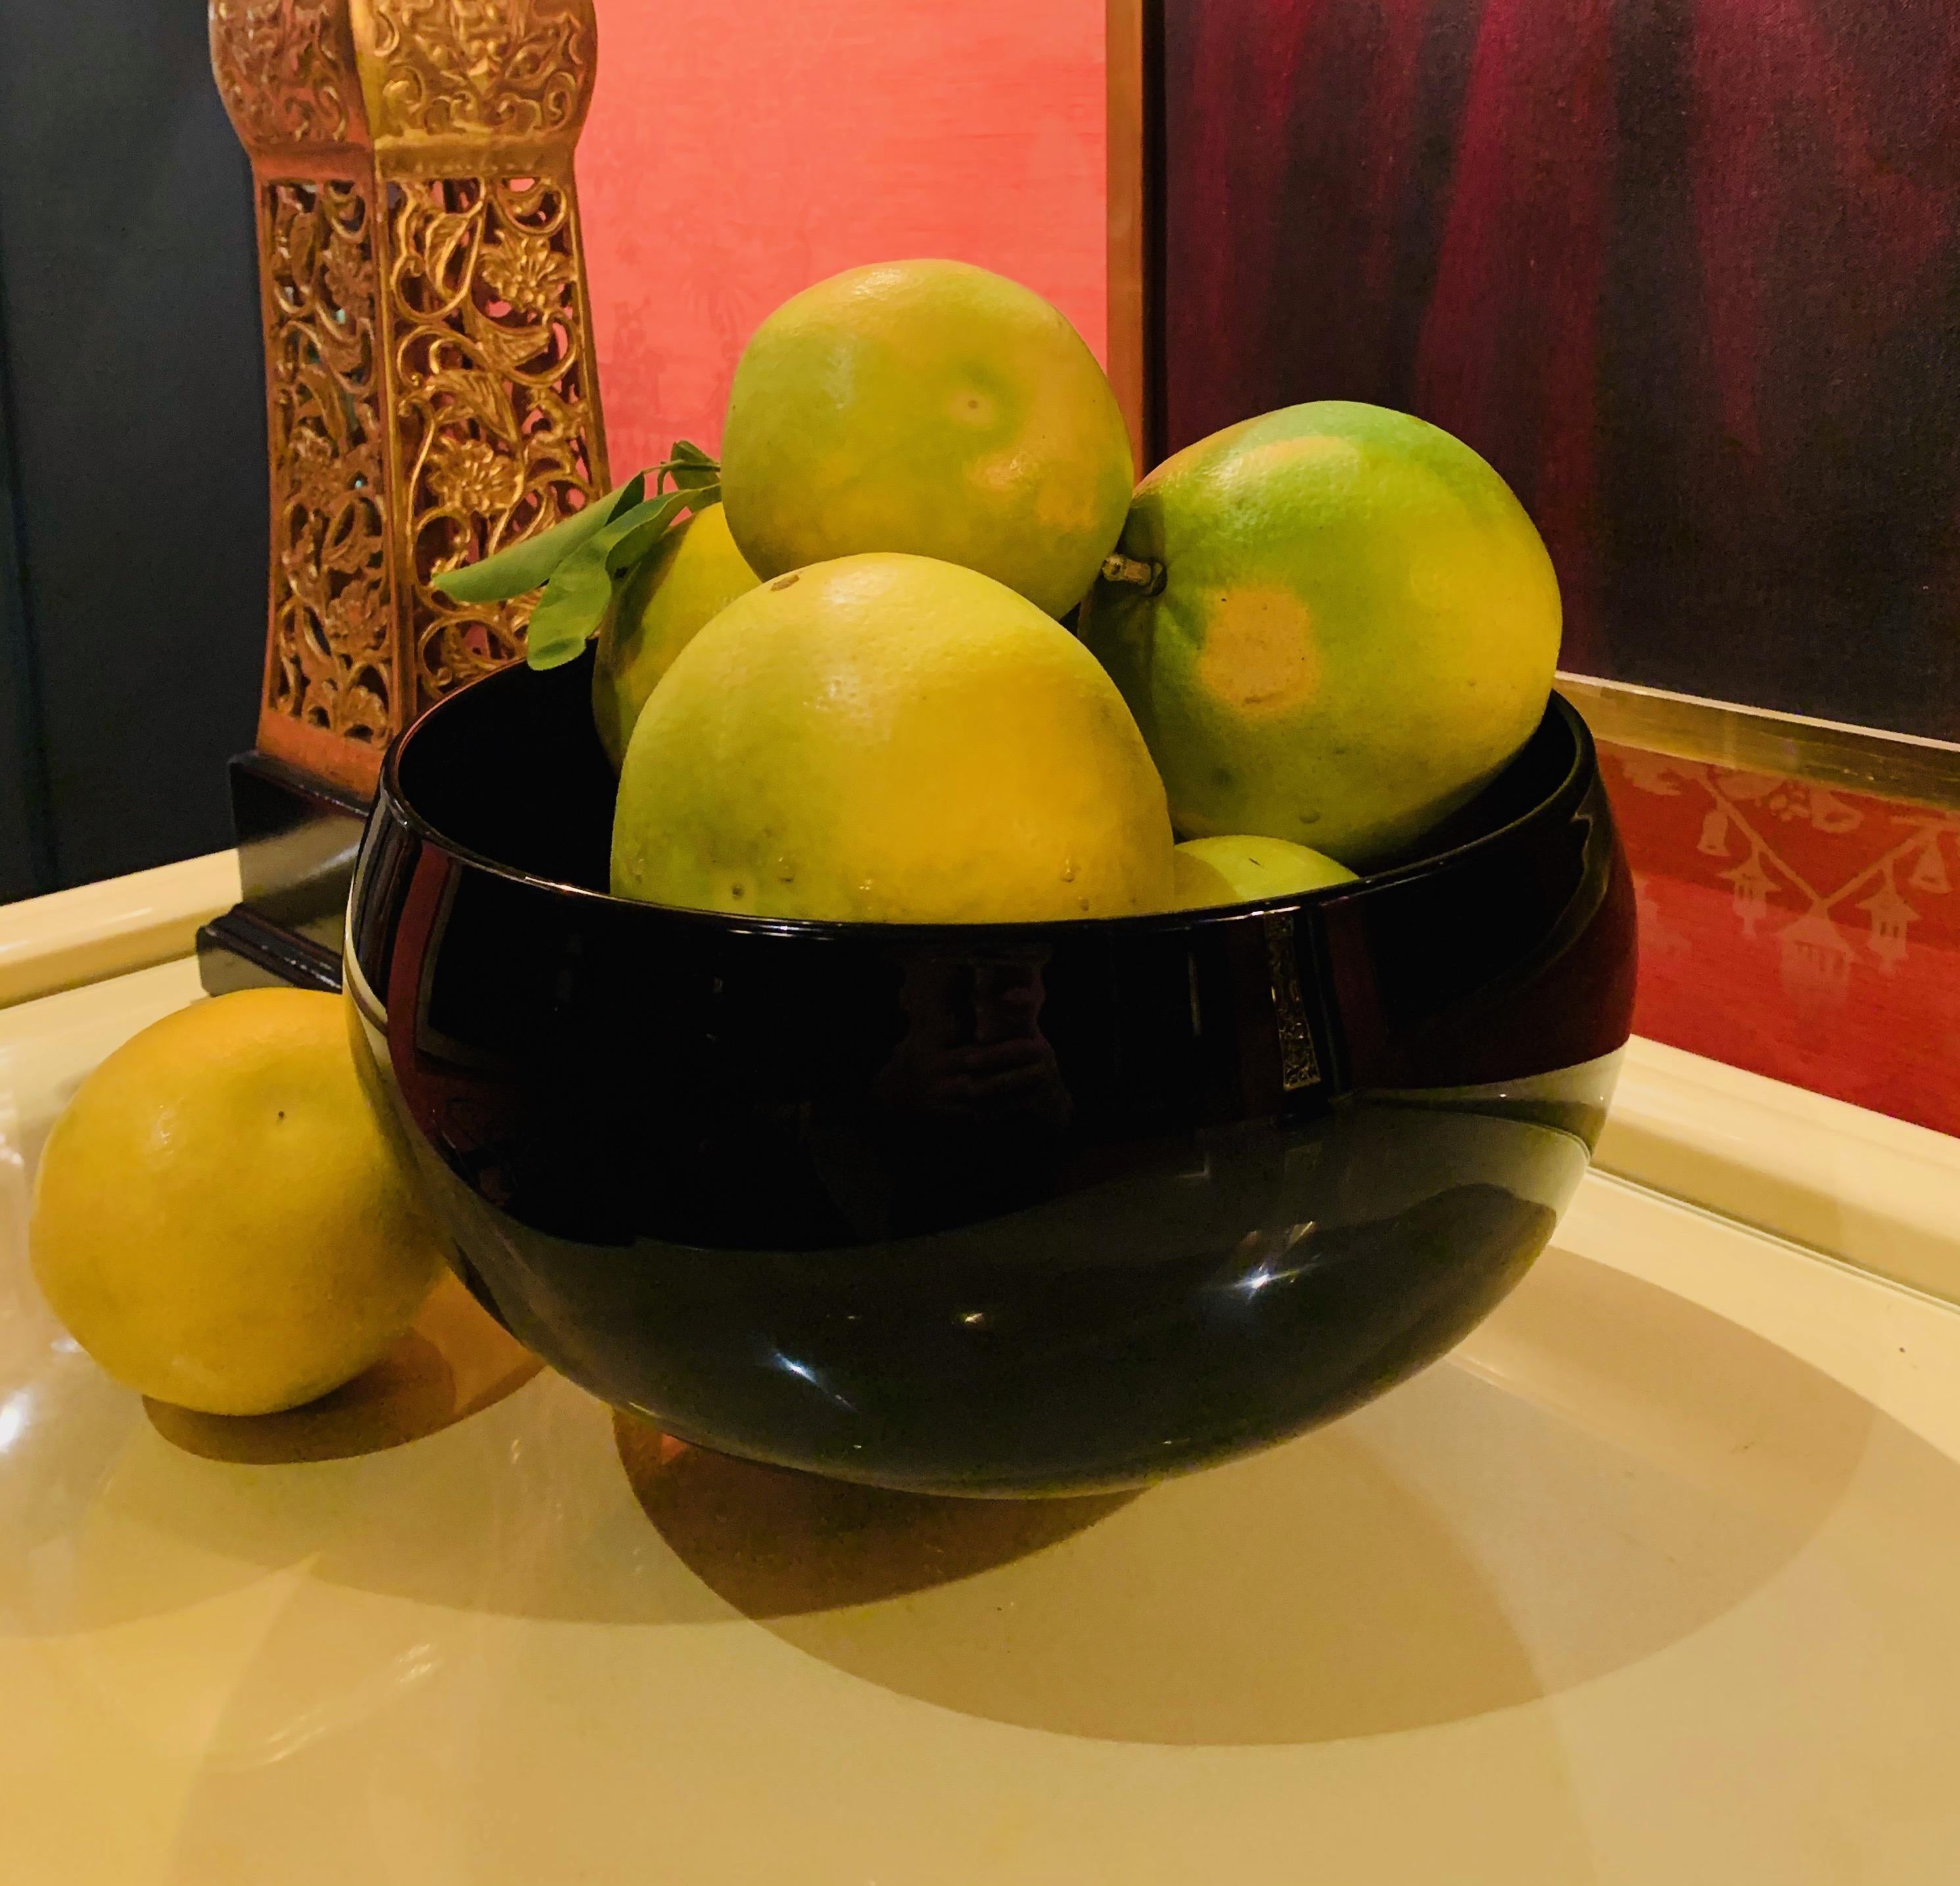 A spectacular Correia Art Glass bowl - large, round and simple, yet the perfect compliment to any table. The small foot, also simple and elegant.

Standing alone or as a piece of art, the subtle Aubergine color looks black to the eye, however,